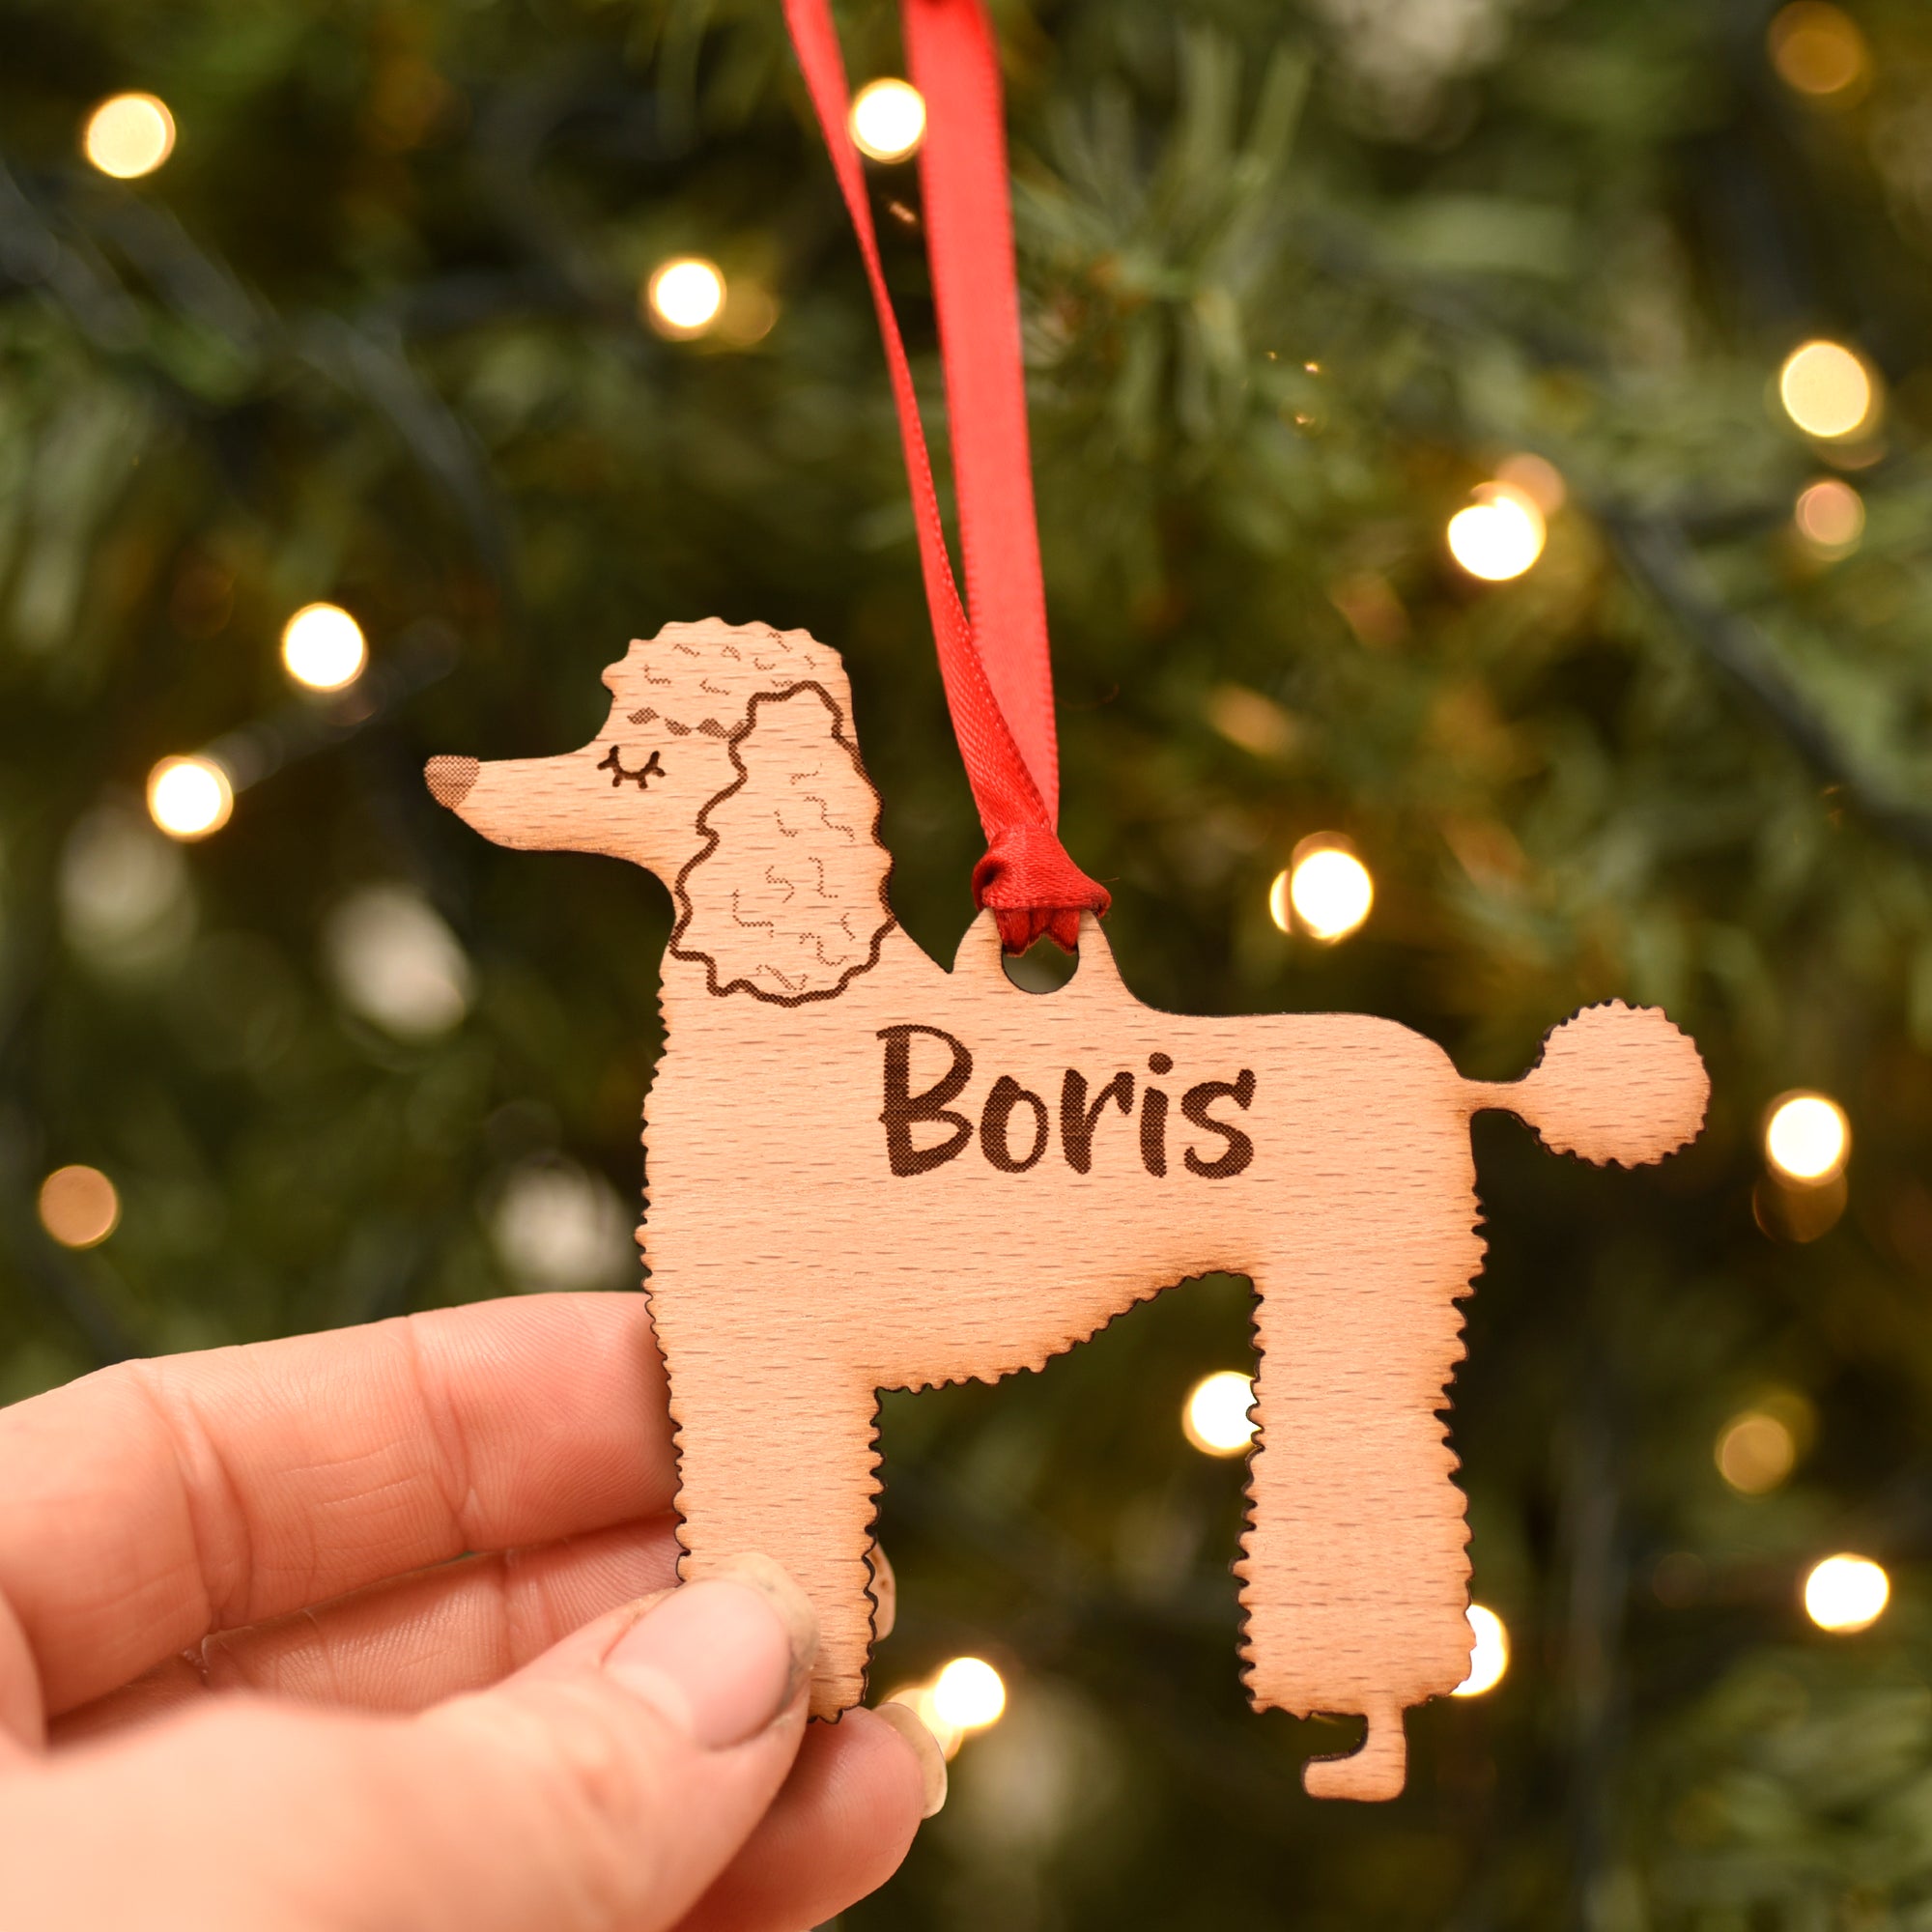 Poodle Personalised Wooden Christmas Decoration